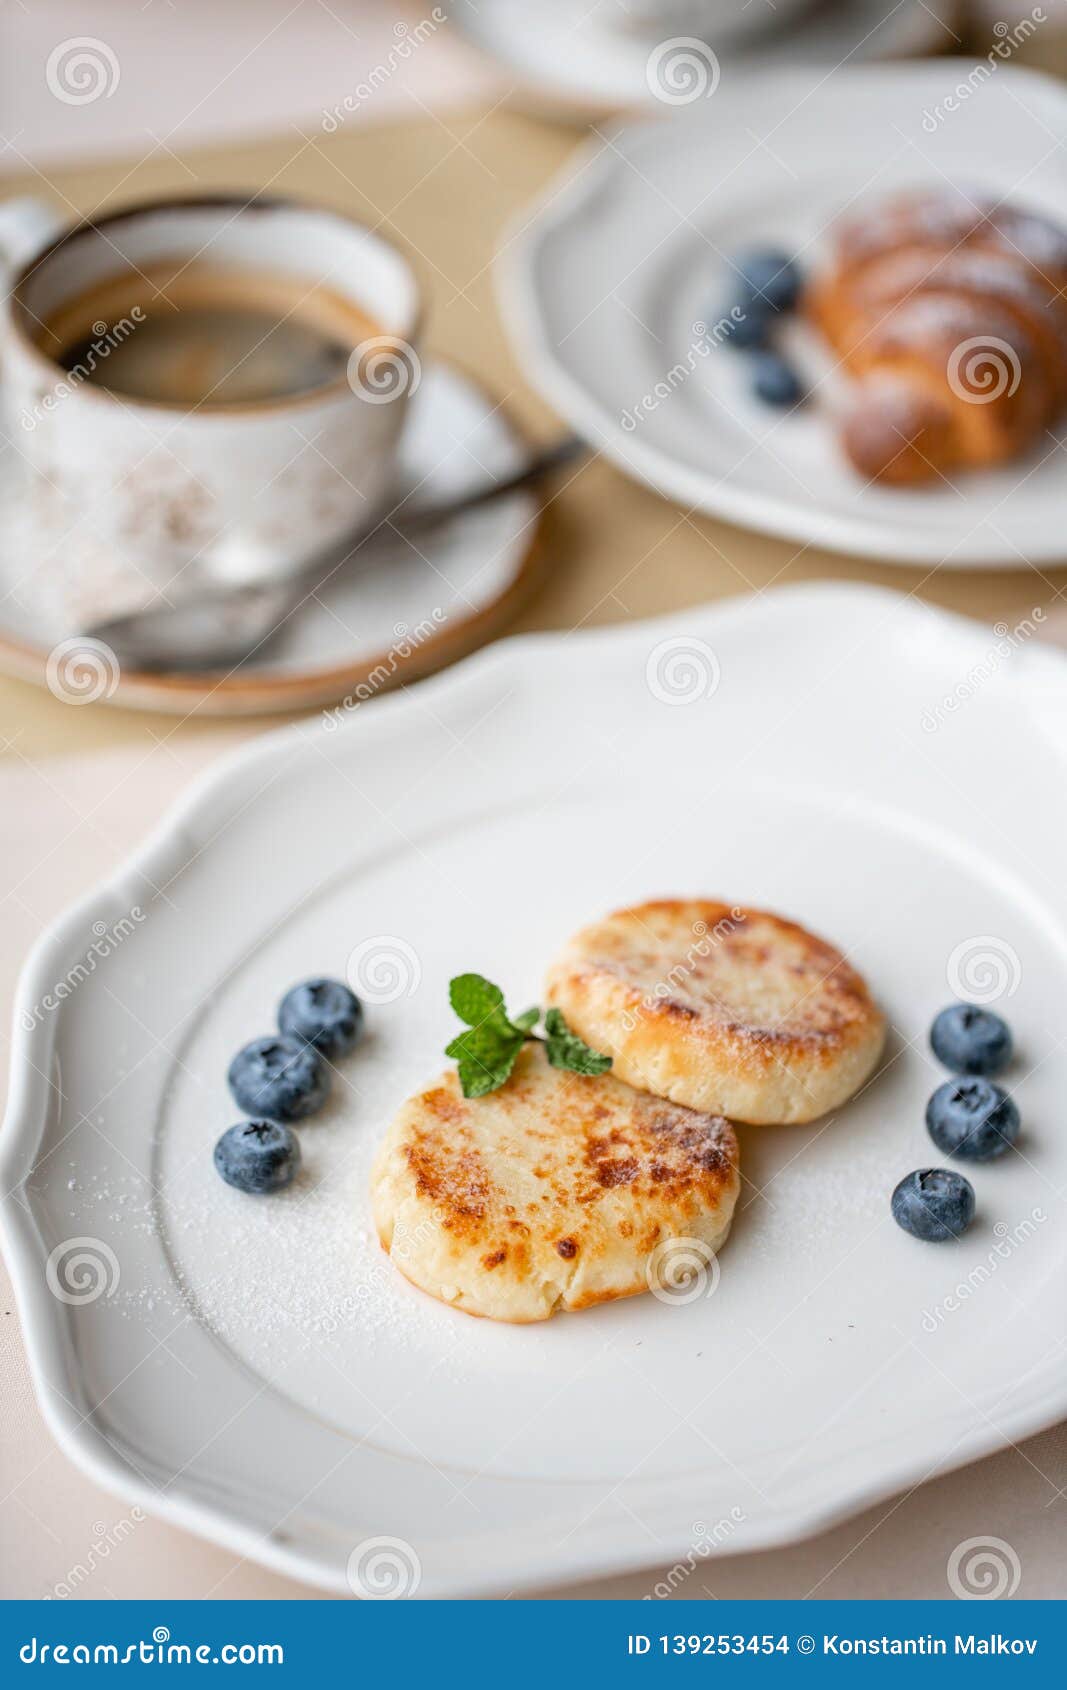 Cottage Cheese Pancakes Or Syrniki With Blueberry On White Plate